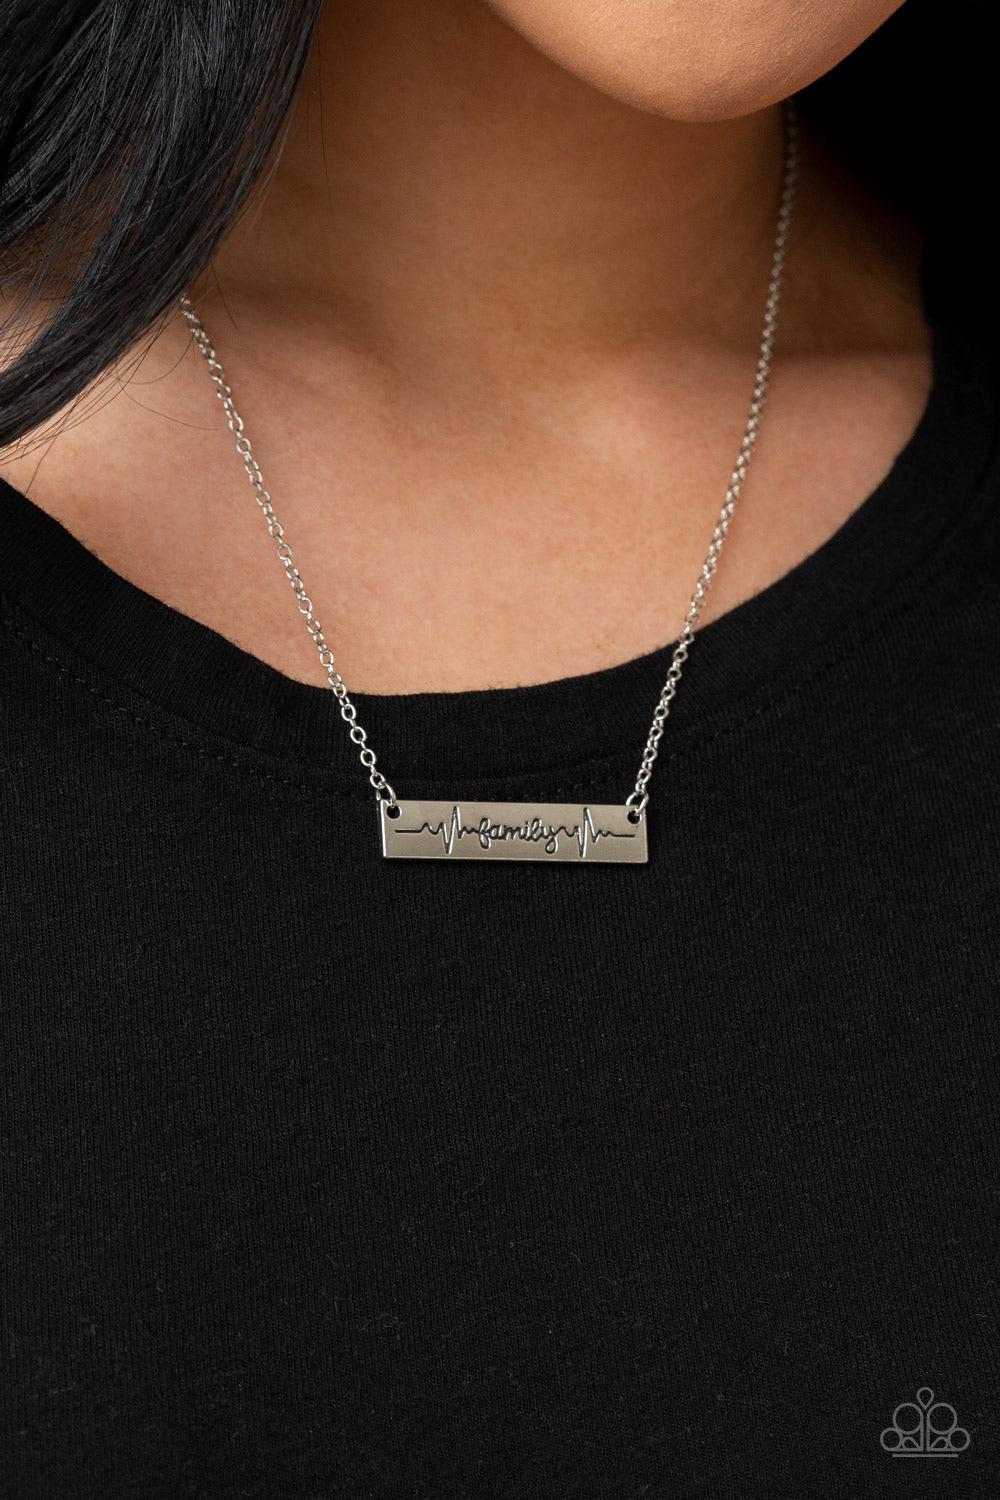 Living The Mom Life Silver Inspirational Necklace-on model - CarasShop.com - $5 Jewelry by Cara Jewels